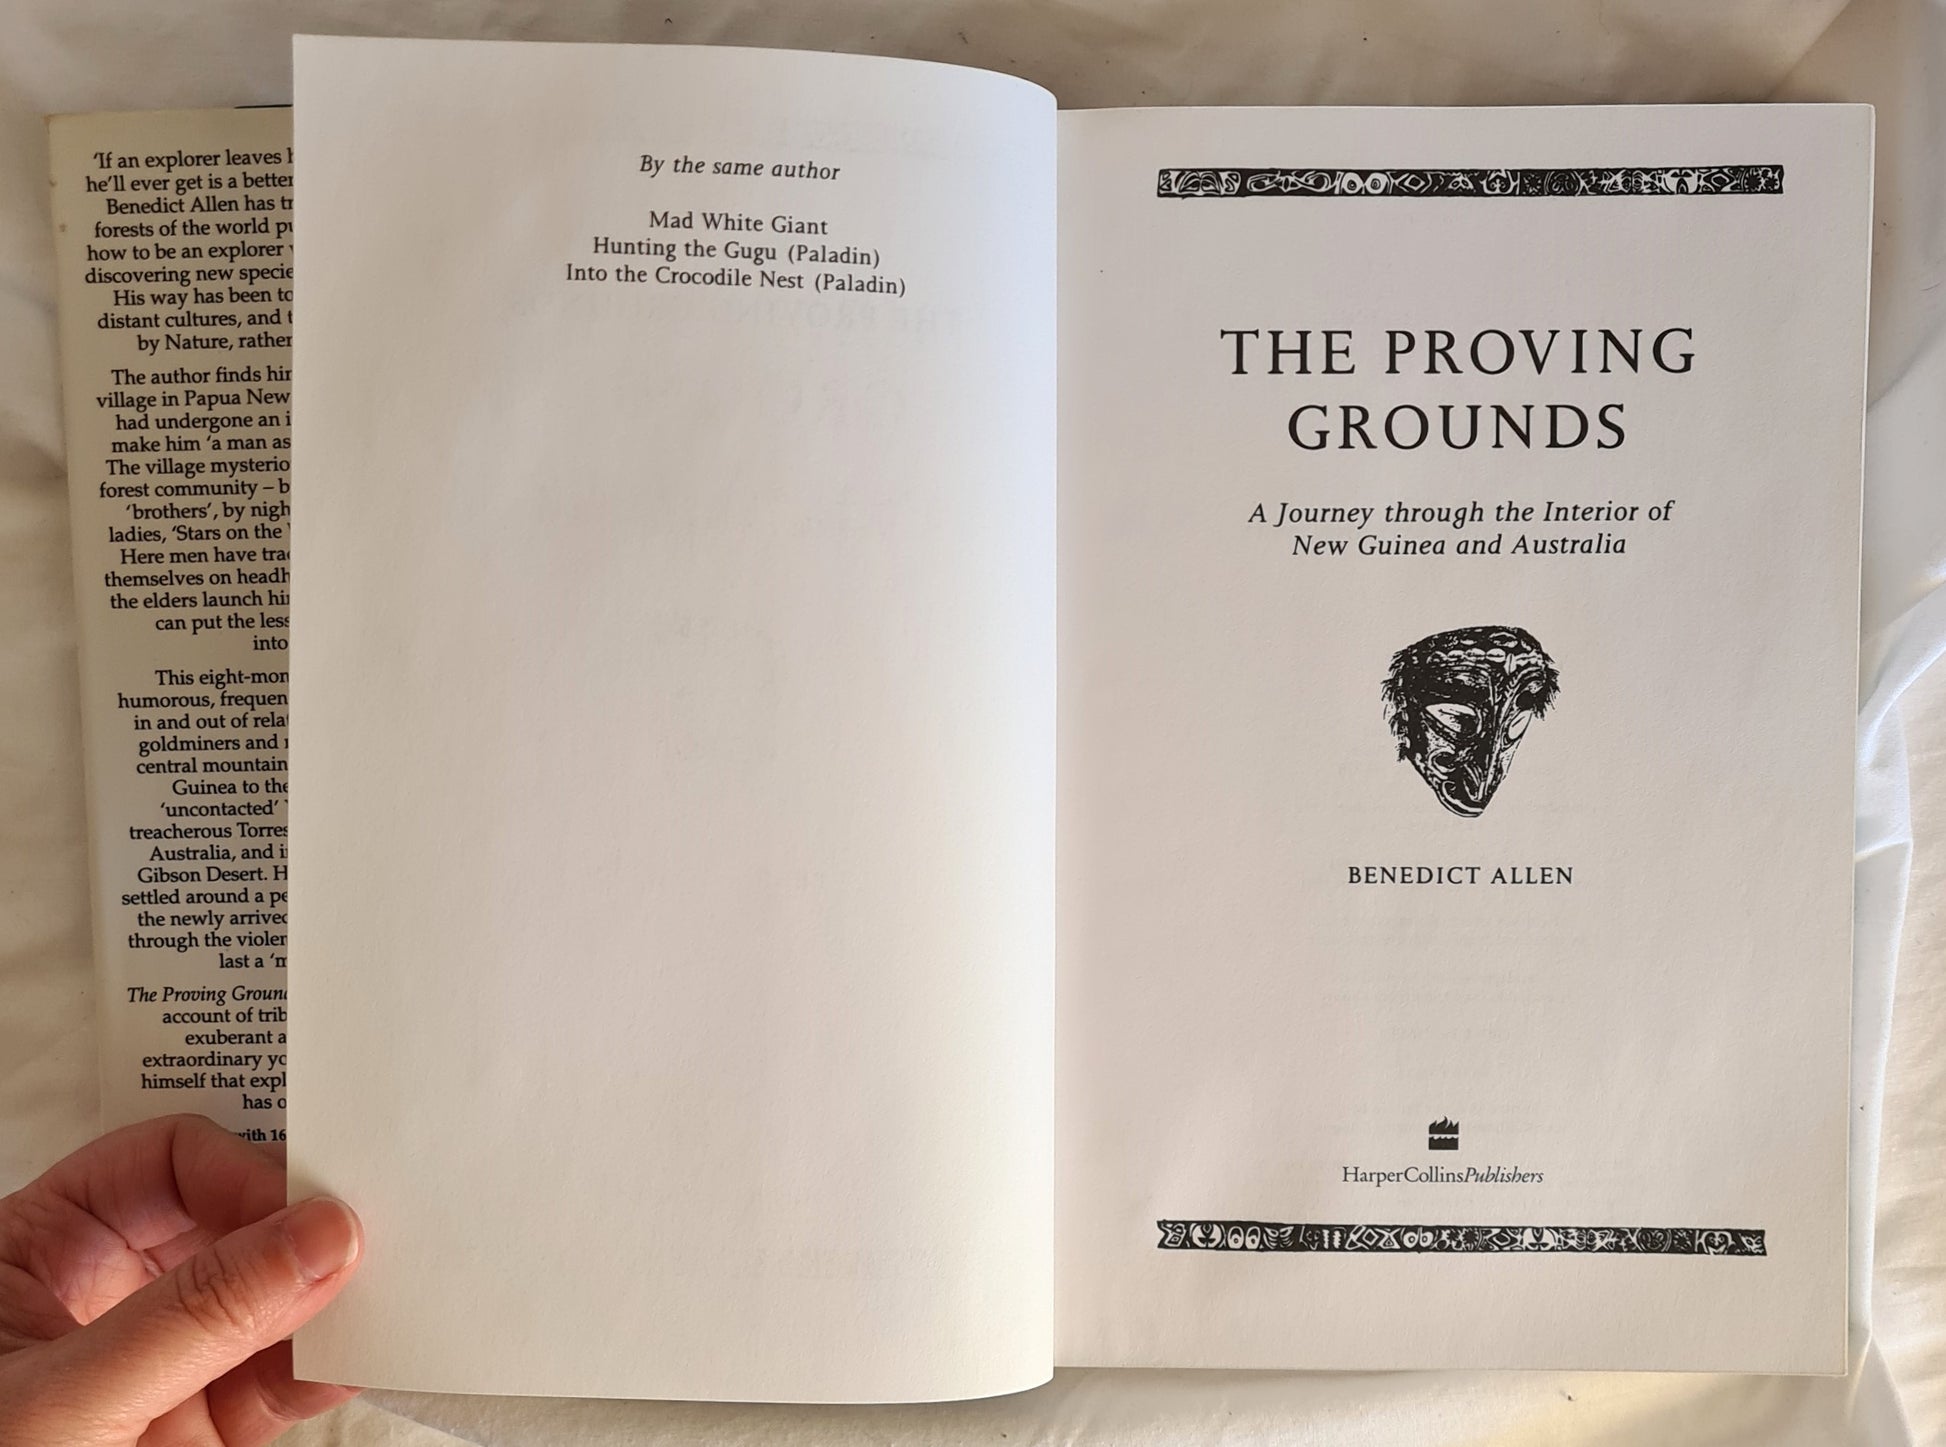 The Proving Grounds  A Journey Through the Interior of New Guinea and Australia  by Benedict Allen